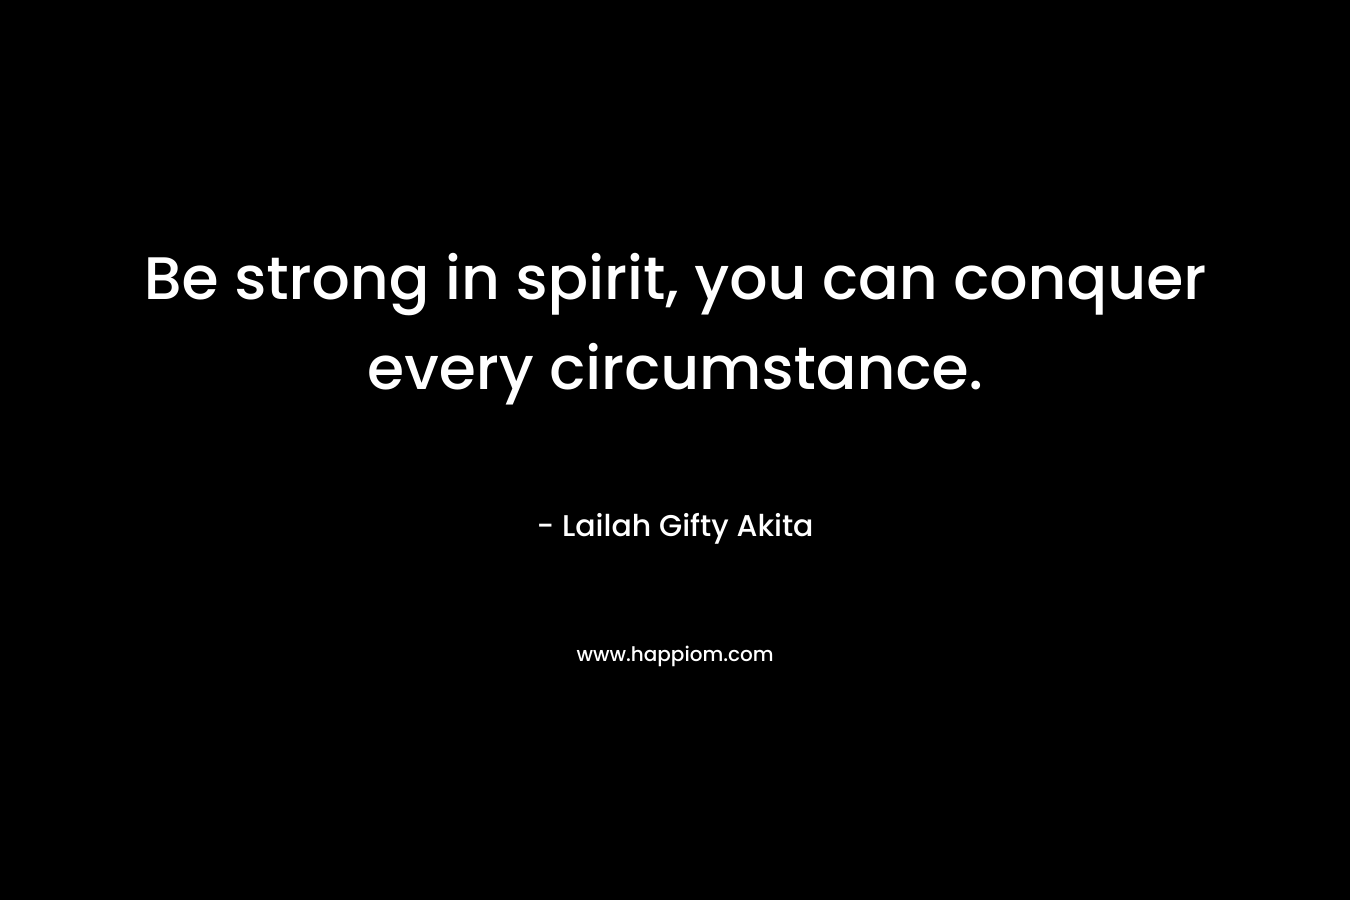 Be strong in spirit, you can conquer every circumstance.